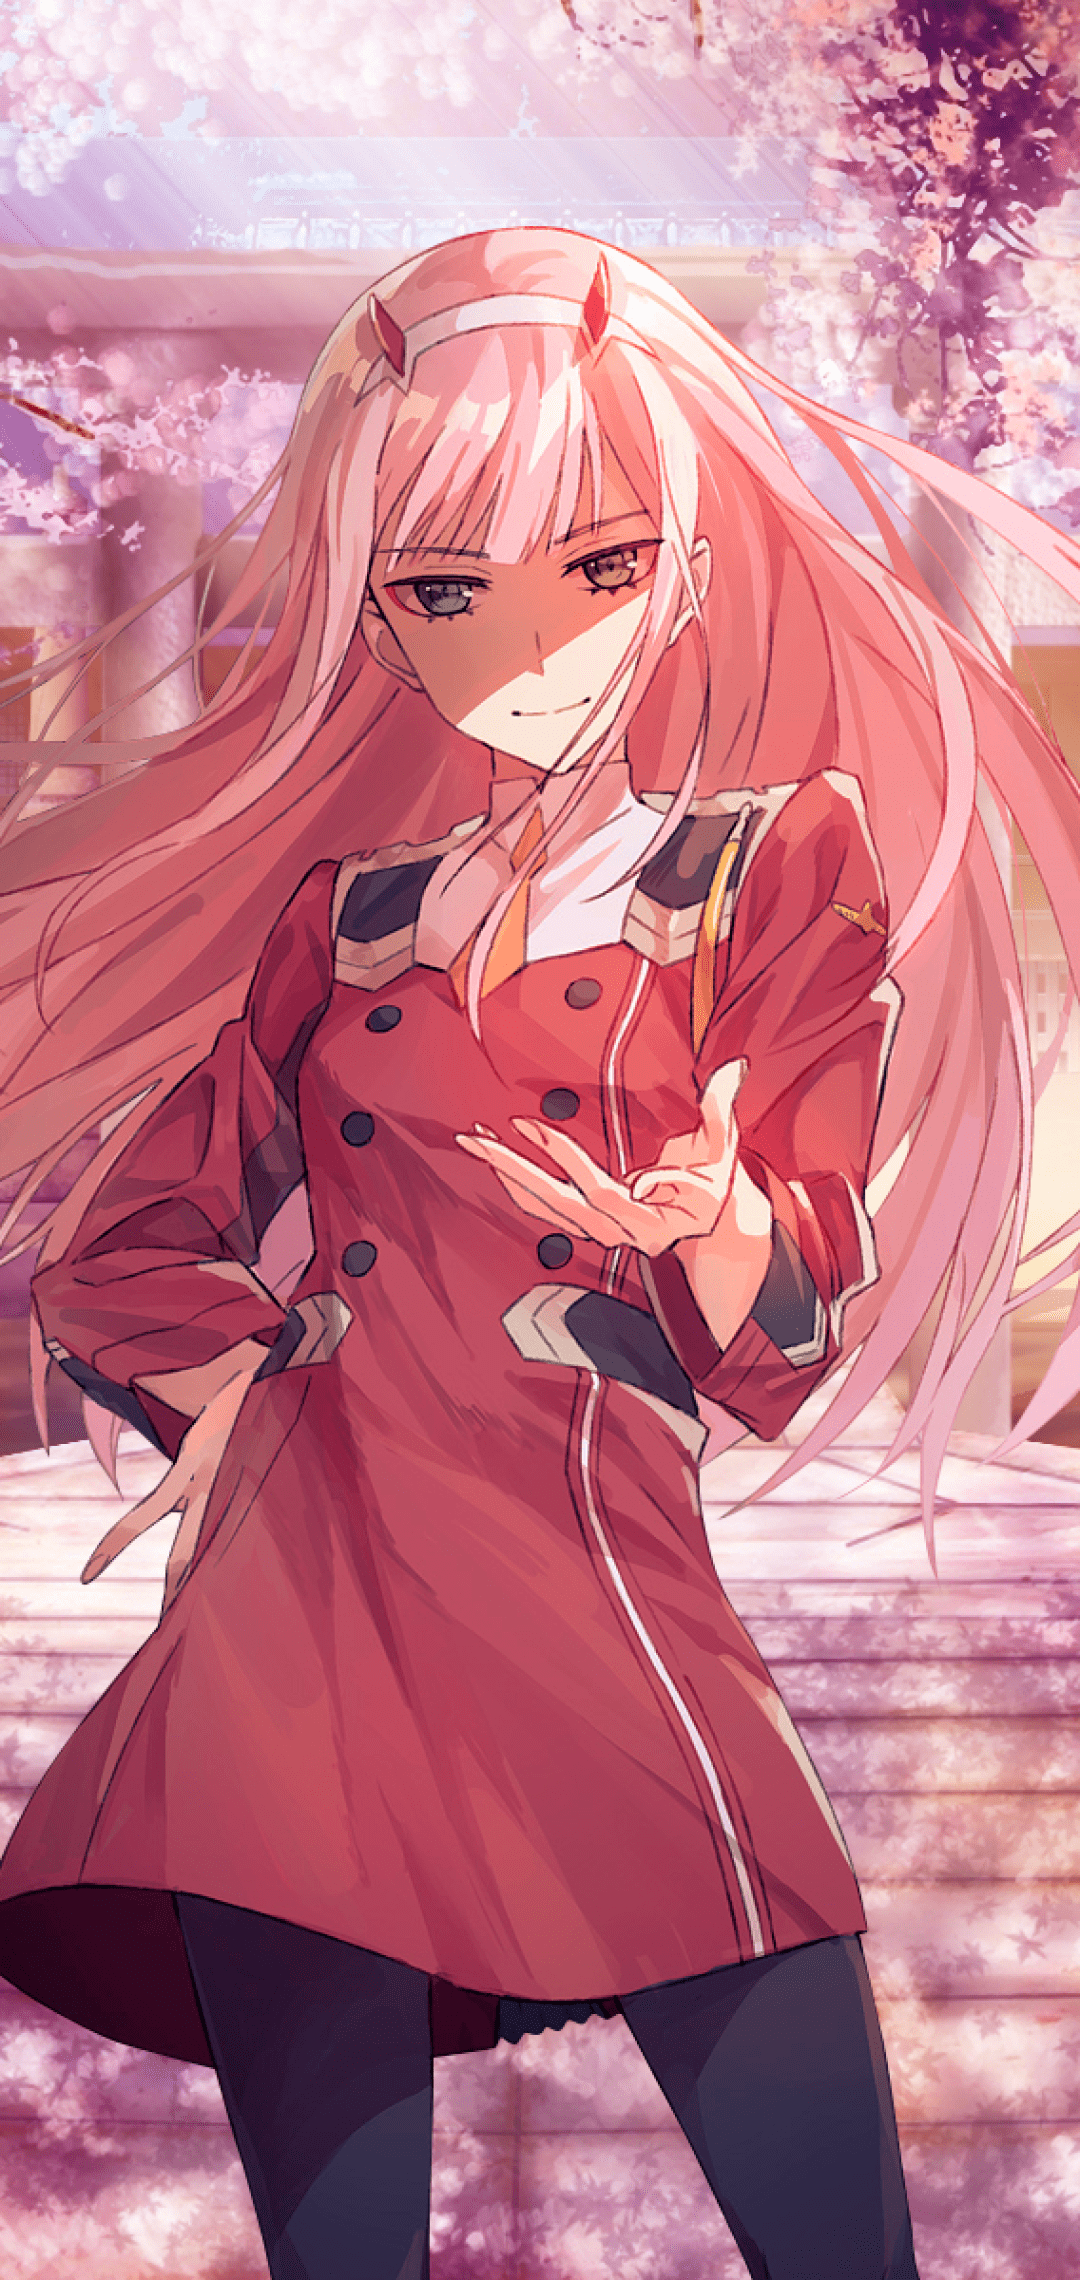 30 Zero Two AppleiPhone 6 750x1334 Wallpapers  Mobile Abyss